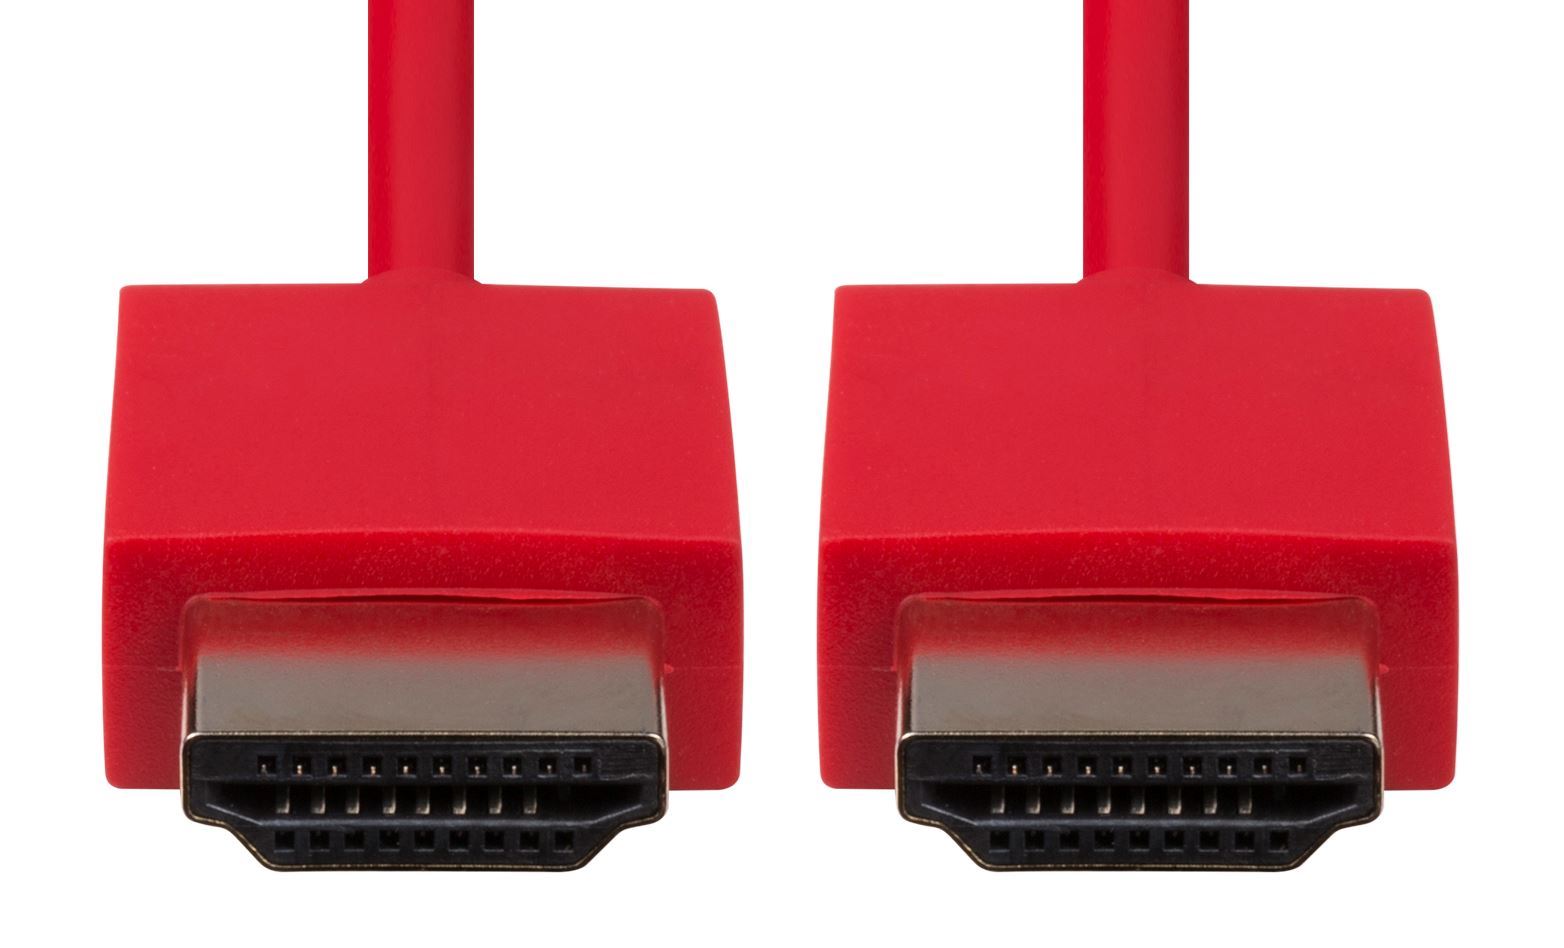 DYNAMIX_0.5M_HDMI_RED_Nano_High_Speed_With_Ethernet_Cable._Designed_for_UHD_Display_up_to_4K2K@60Hz._Slimline_Robust_Cable._Supports_CEC_2.0,_3D,_&_ARC._Supports_Up_to_32_Audio_Channels. 767